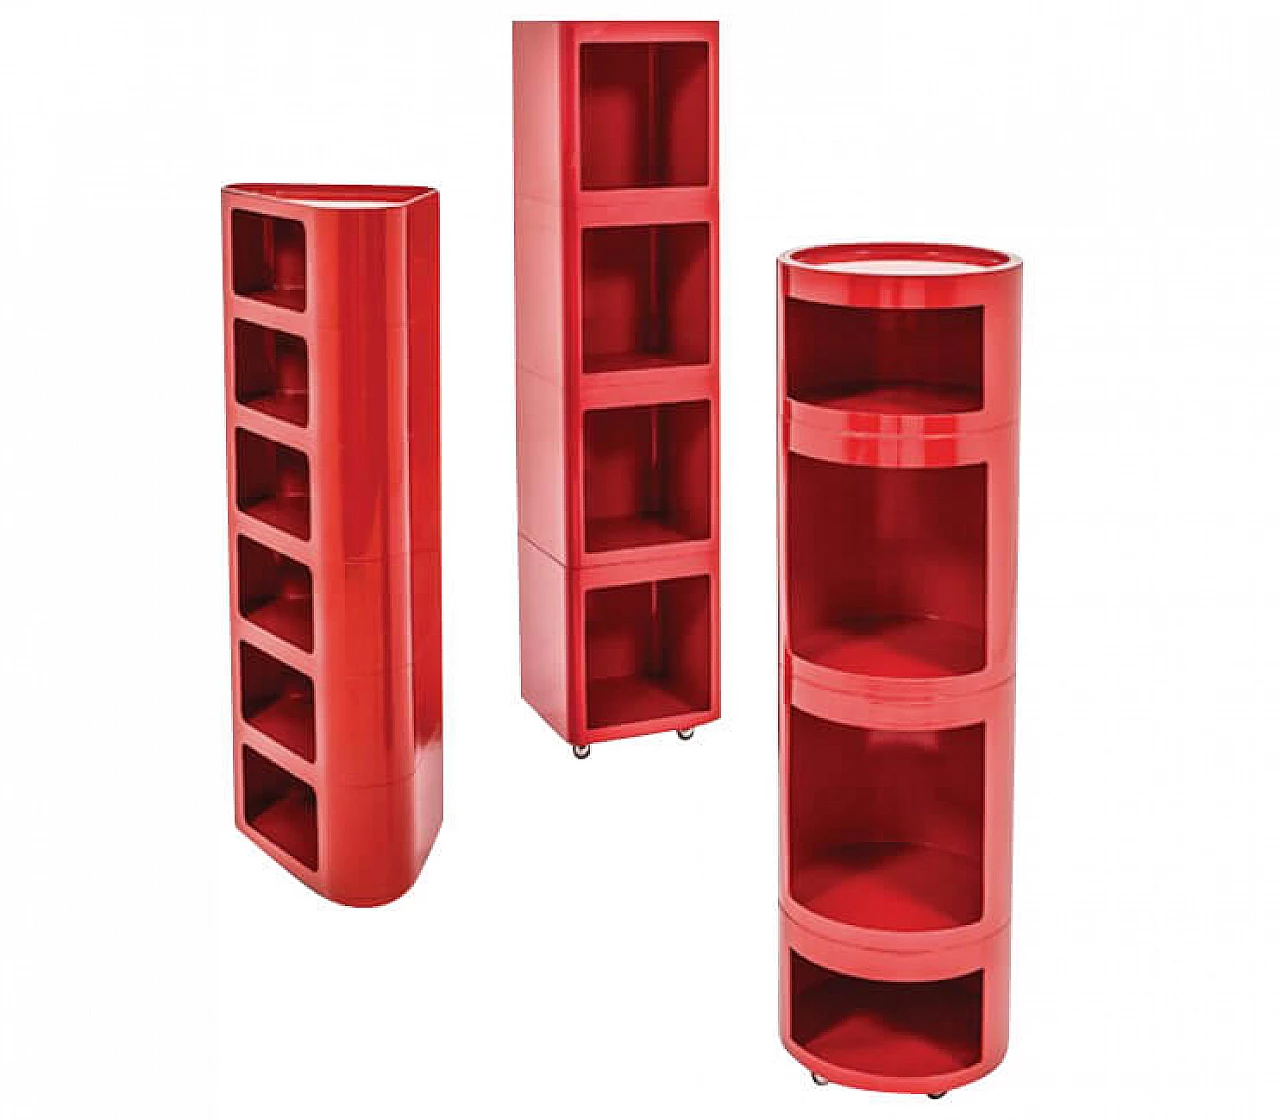 Valletto cylindrical stackable shelves by Castiglioni, Caviraghi and Lanza for Valenti, 70s 1229649